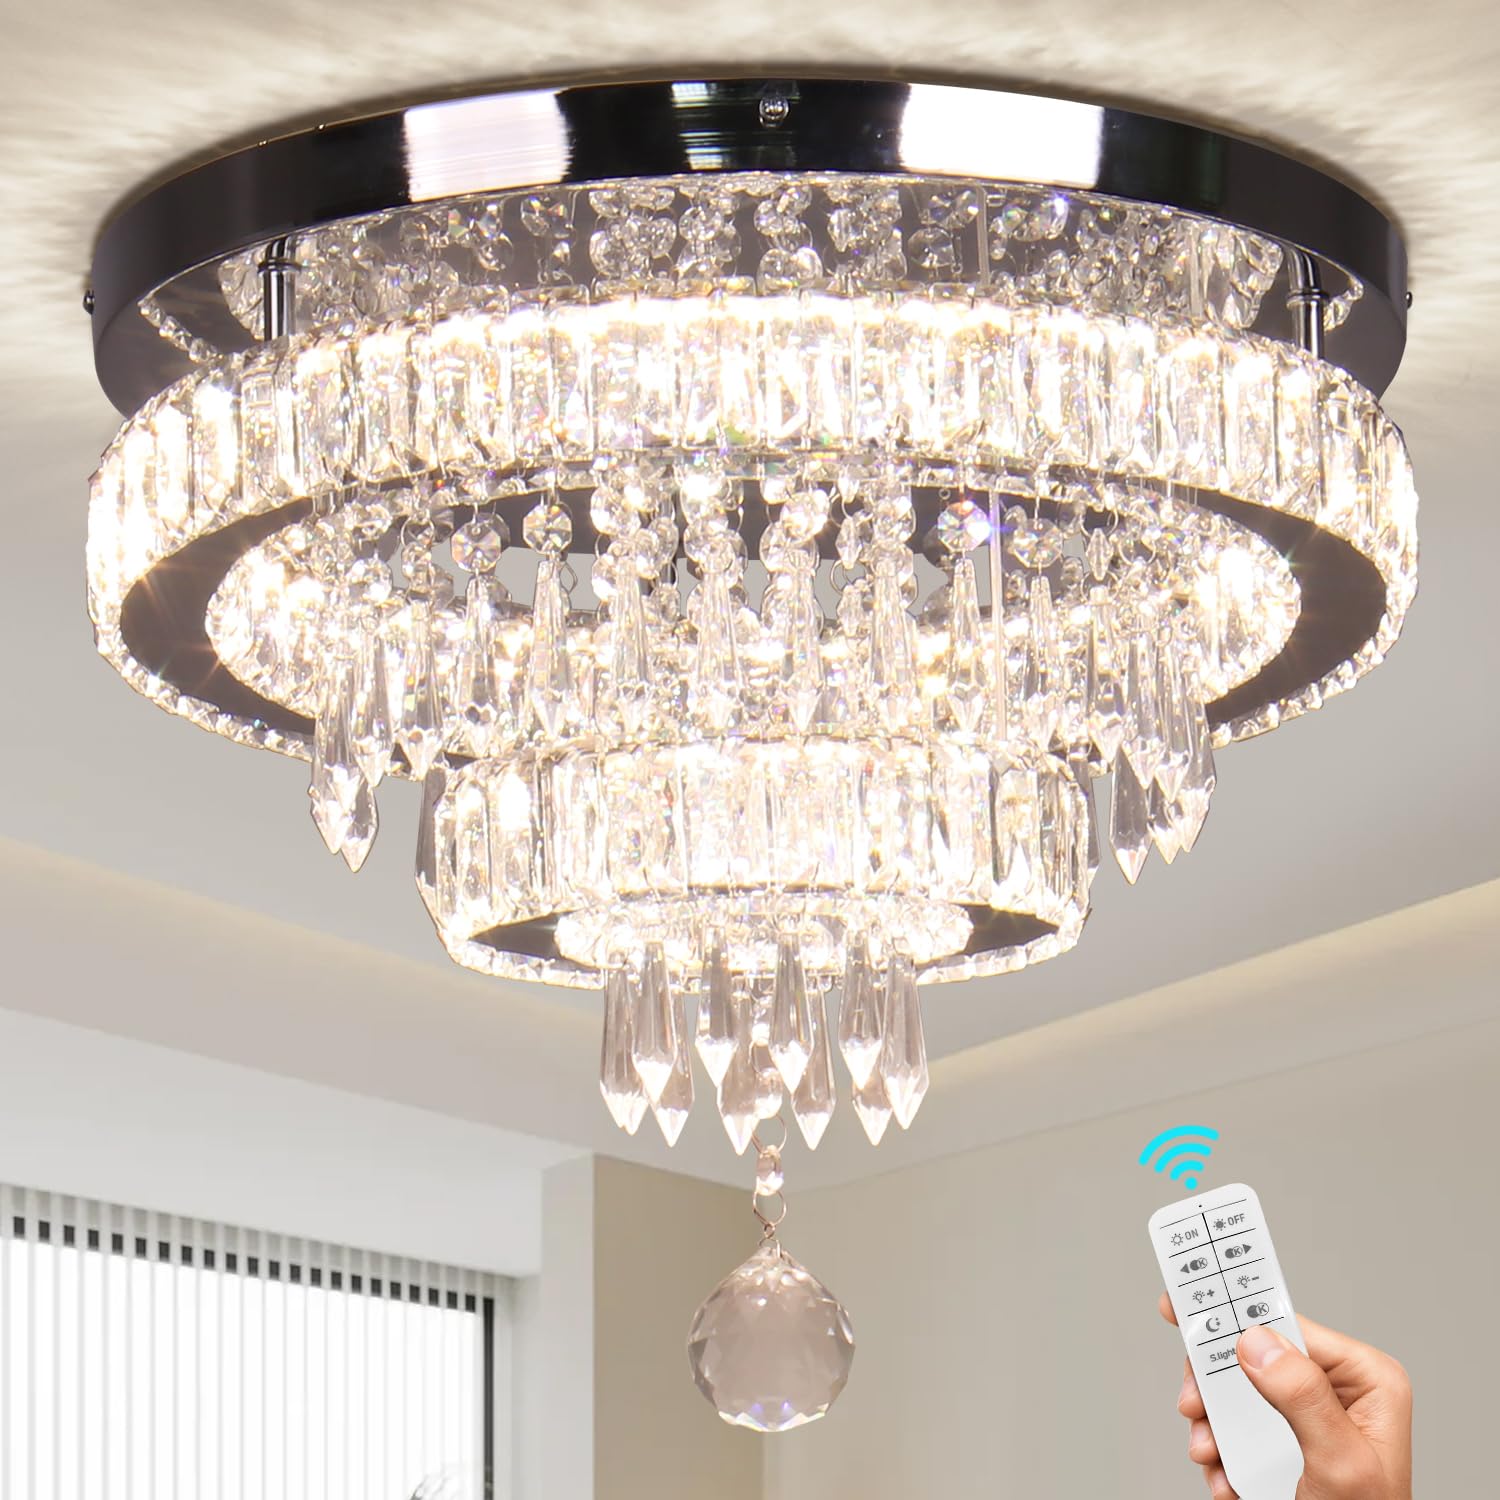 15.7" Modern Crystal Chandeliers Dimmable 2 Rings Crystal Ceiling Light Fixture Flush Mount Ceiling Light for Bedroom Dining Room Living Room(Multicolor with Remote Control)